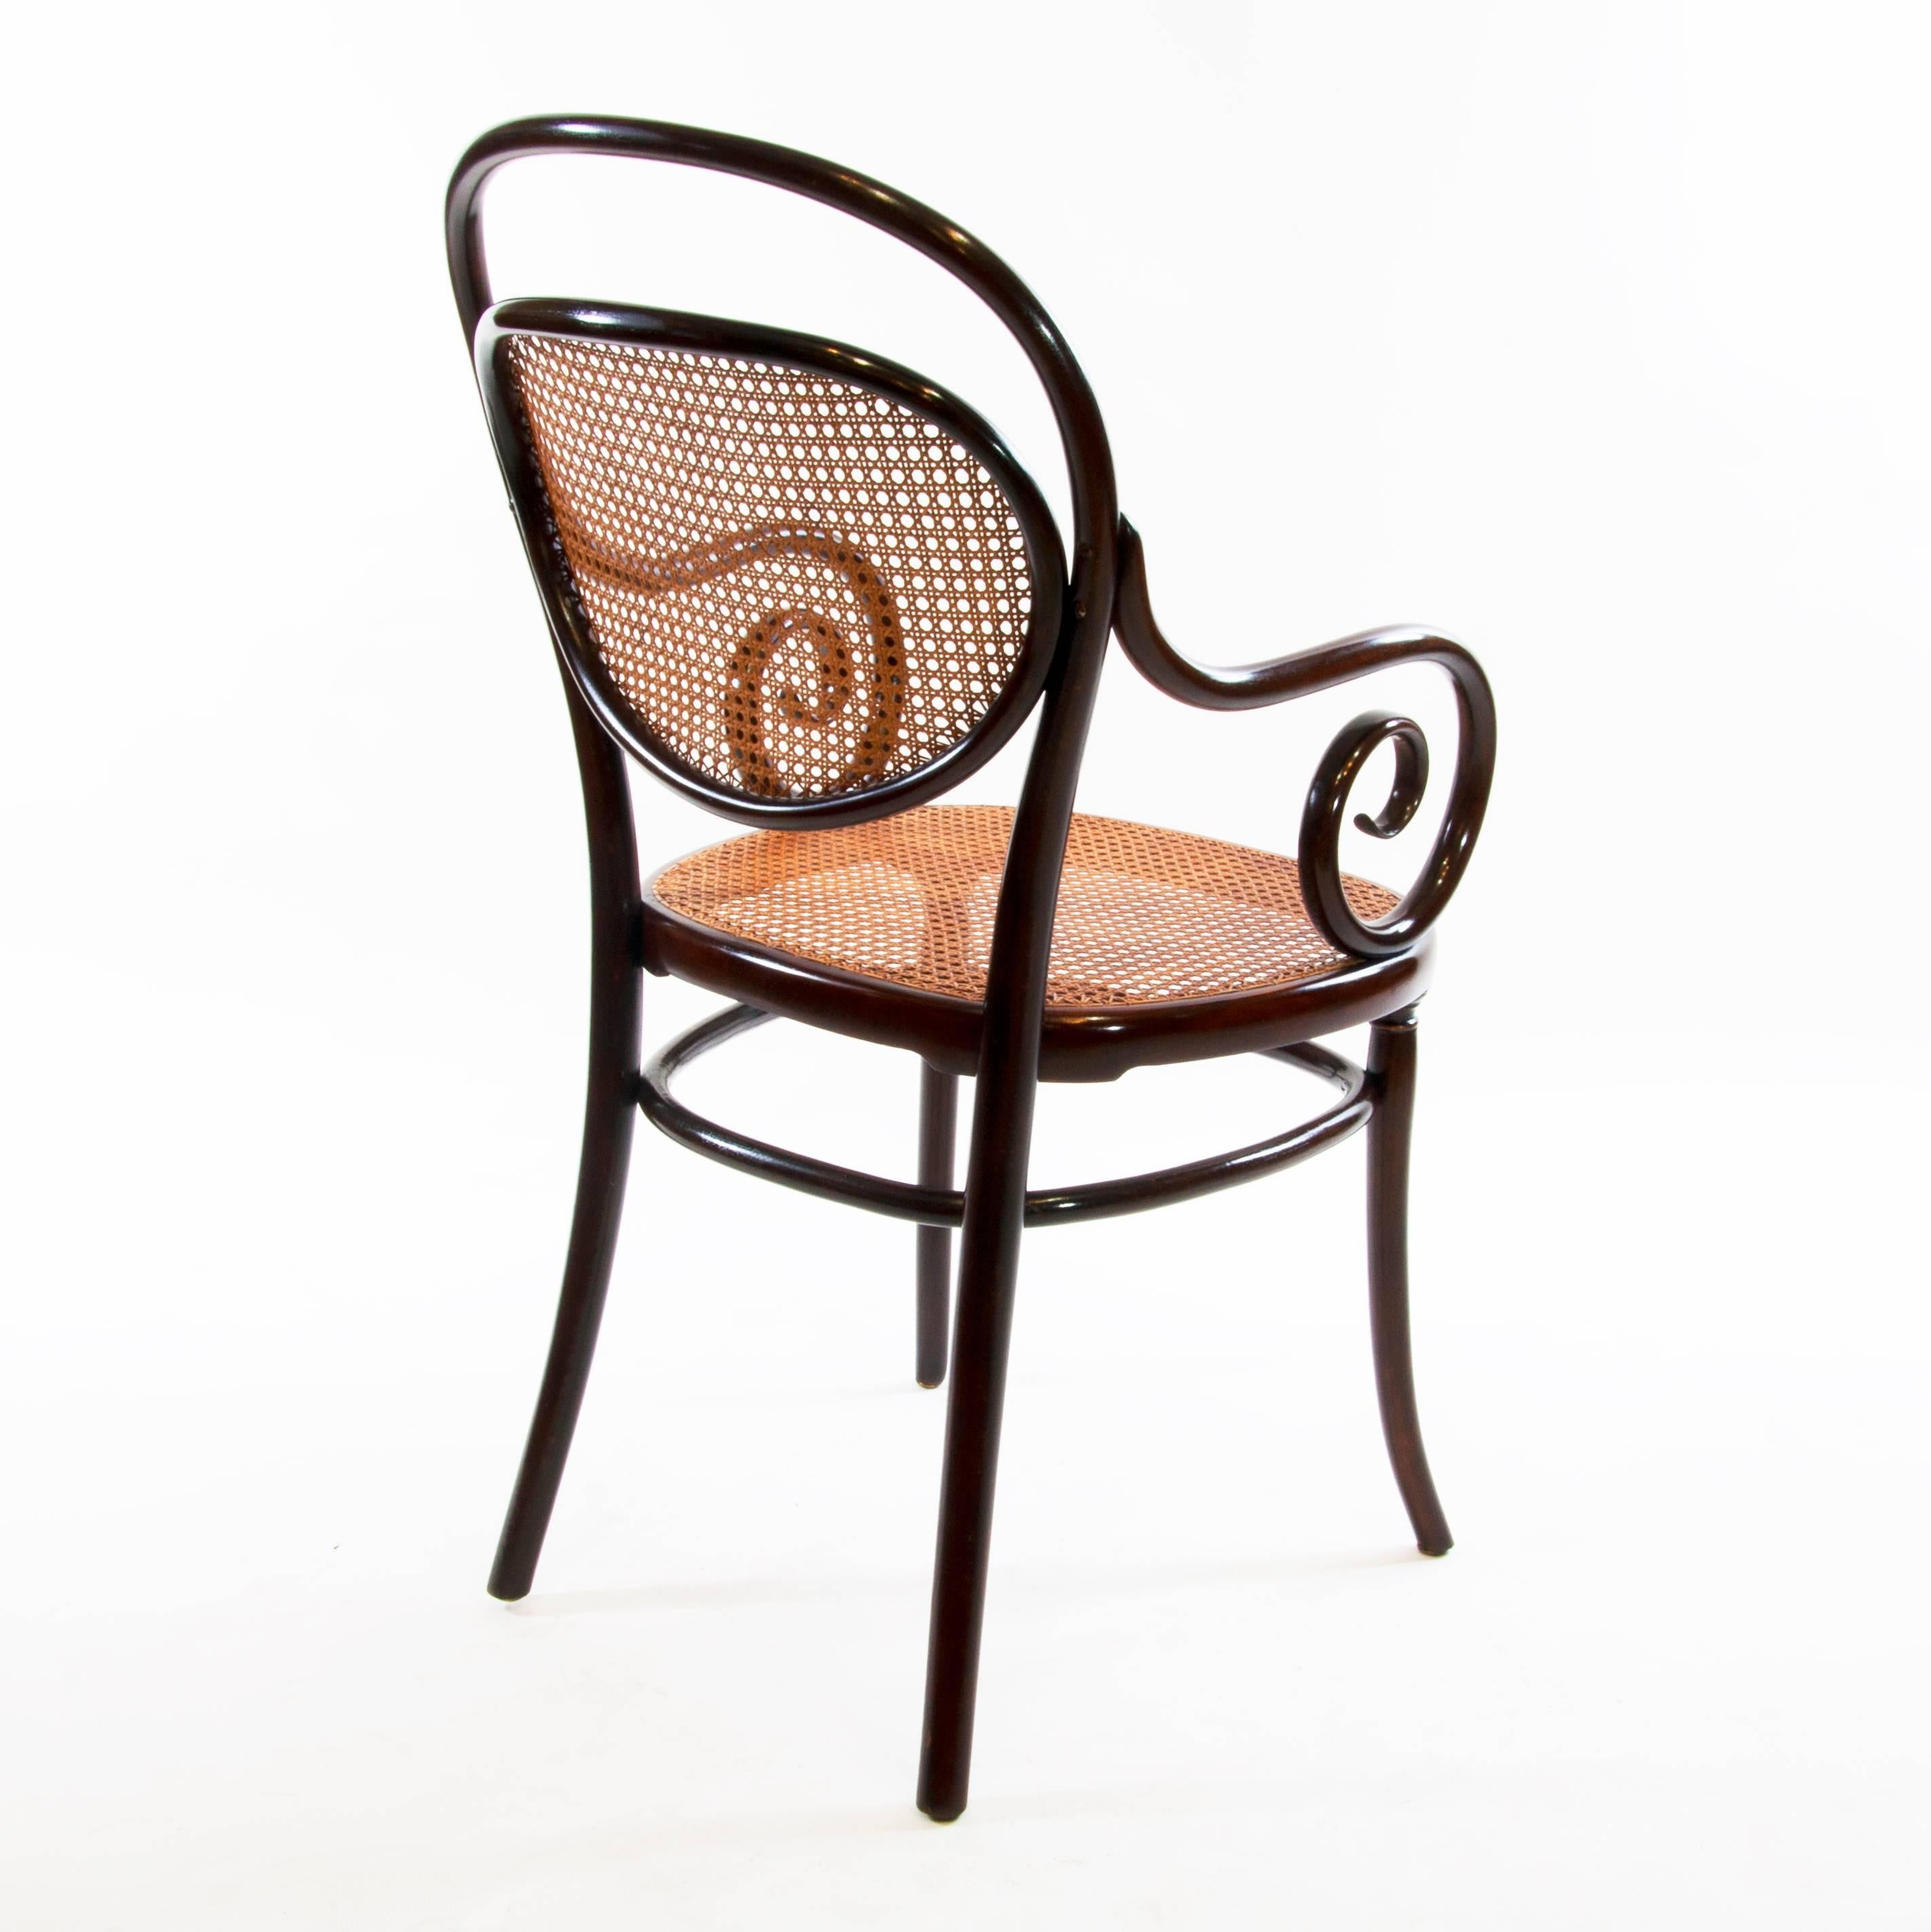 Stained Antique Thonet Bentwood Armchair Fauteuil No. 11 For Sale